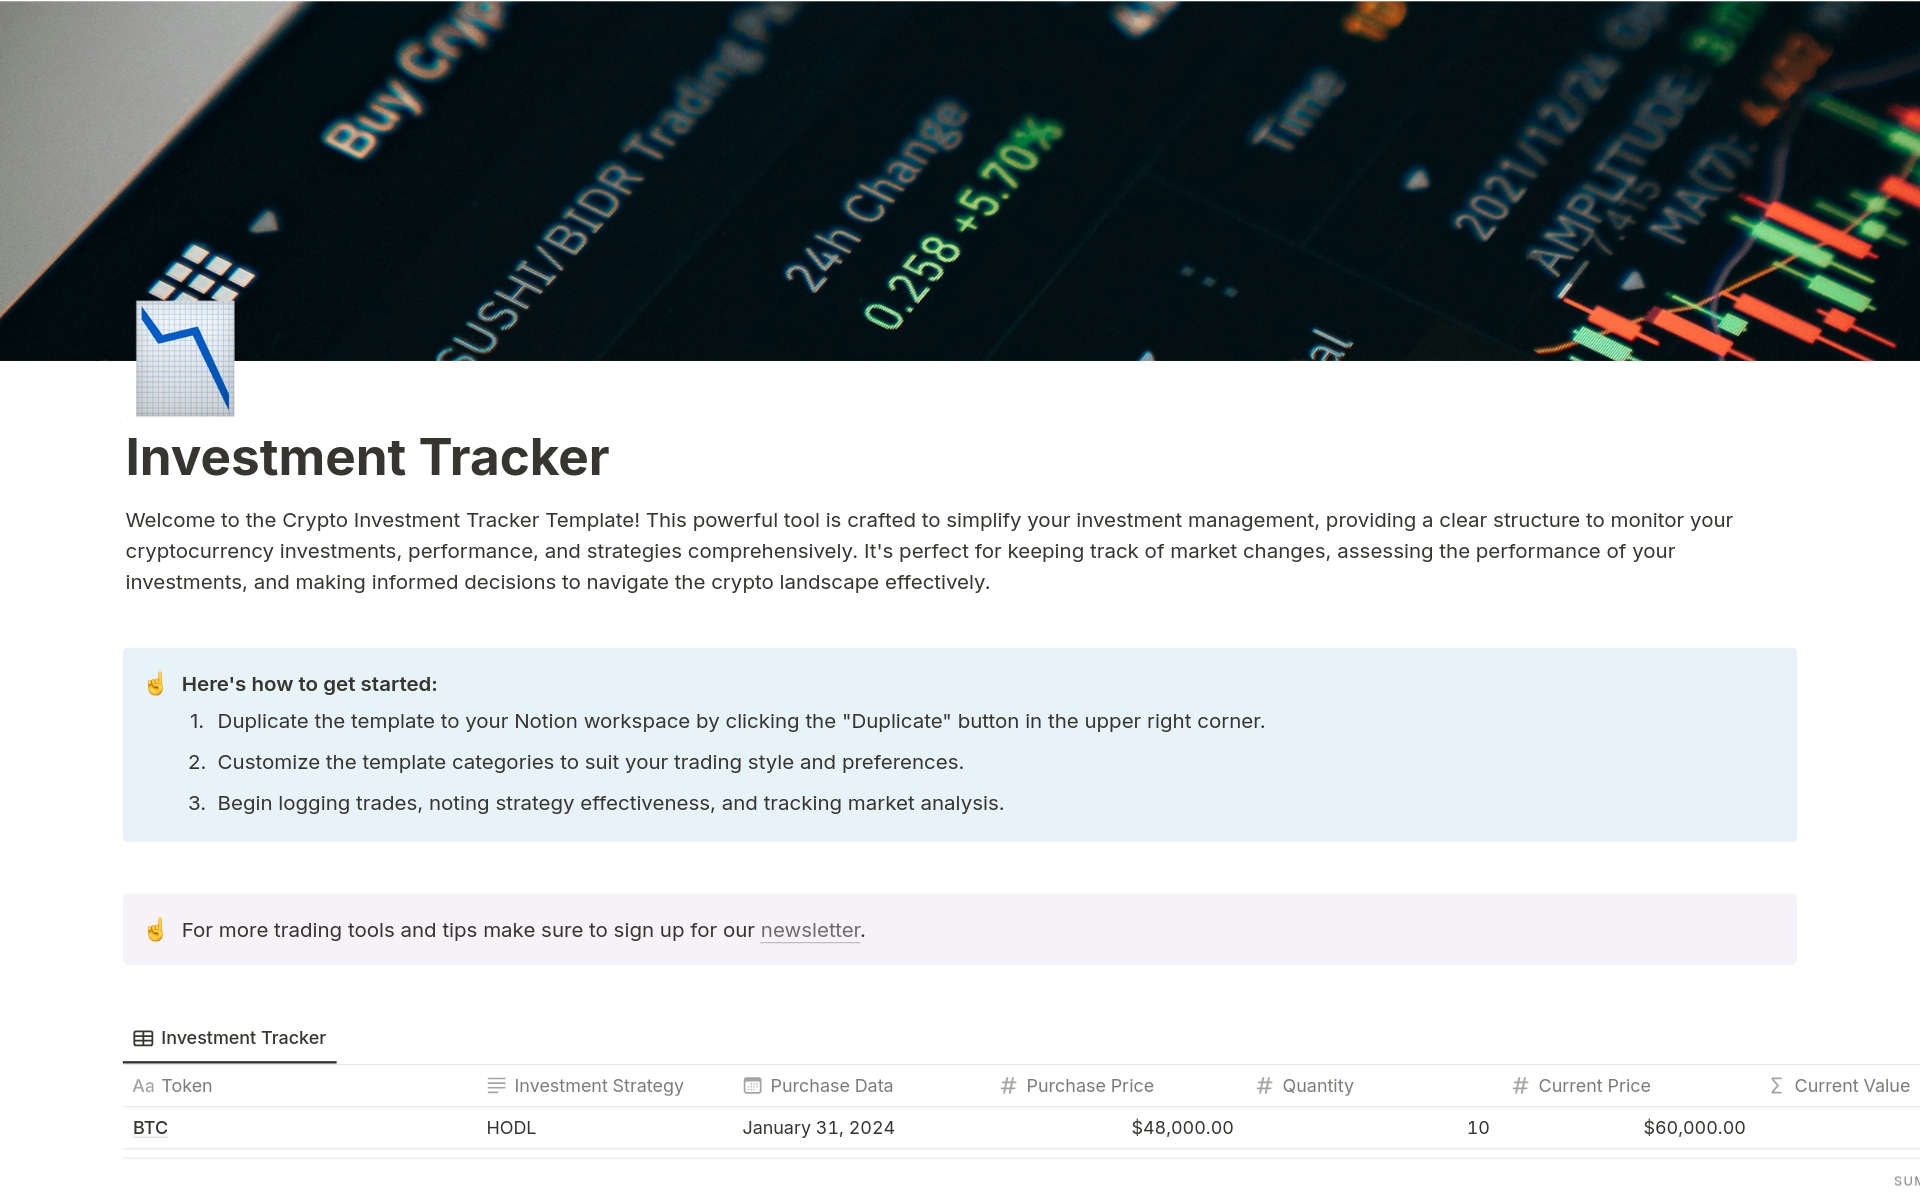 Discover a streamlined way to manage your crypto investments with our Crypto Investment Tracker Template. Efficiently monitor performance, track market trends, and strategize for success.